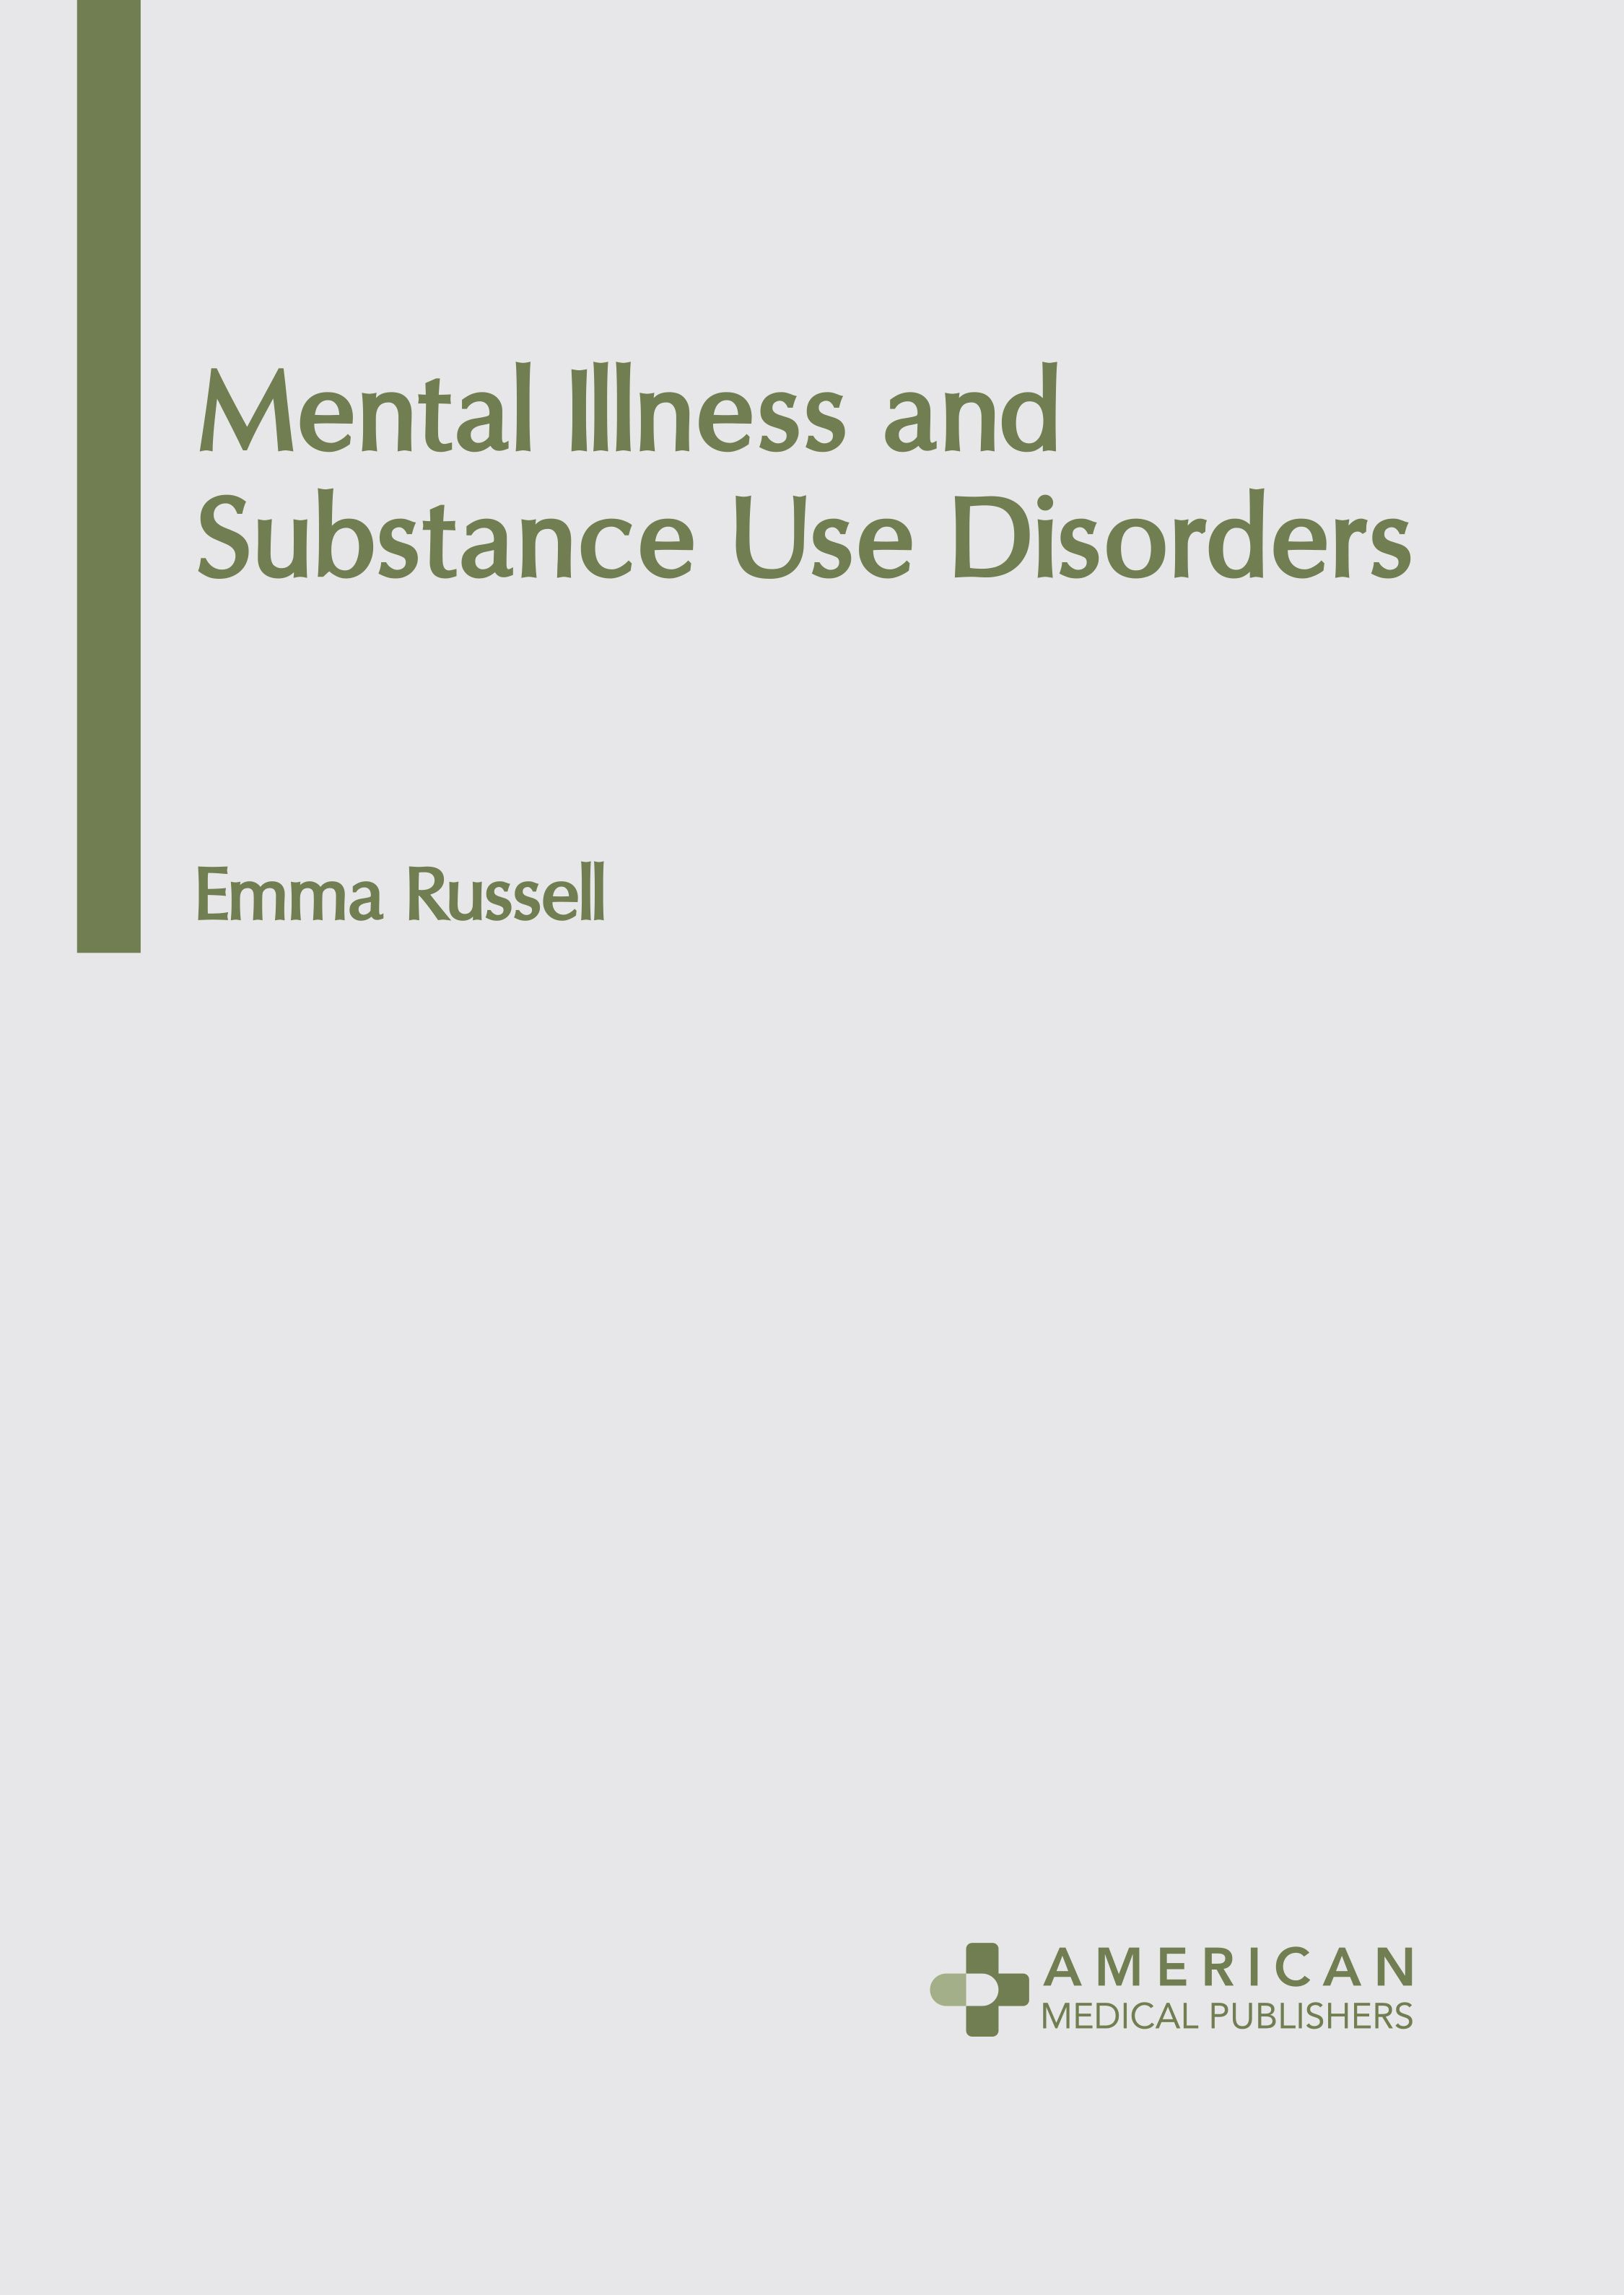 MENTAL ILLNESS AND SUBSTANCE USE DISORDERS